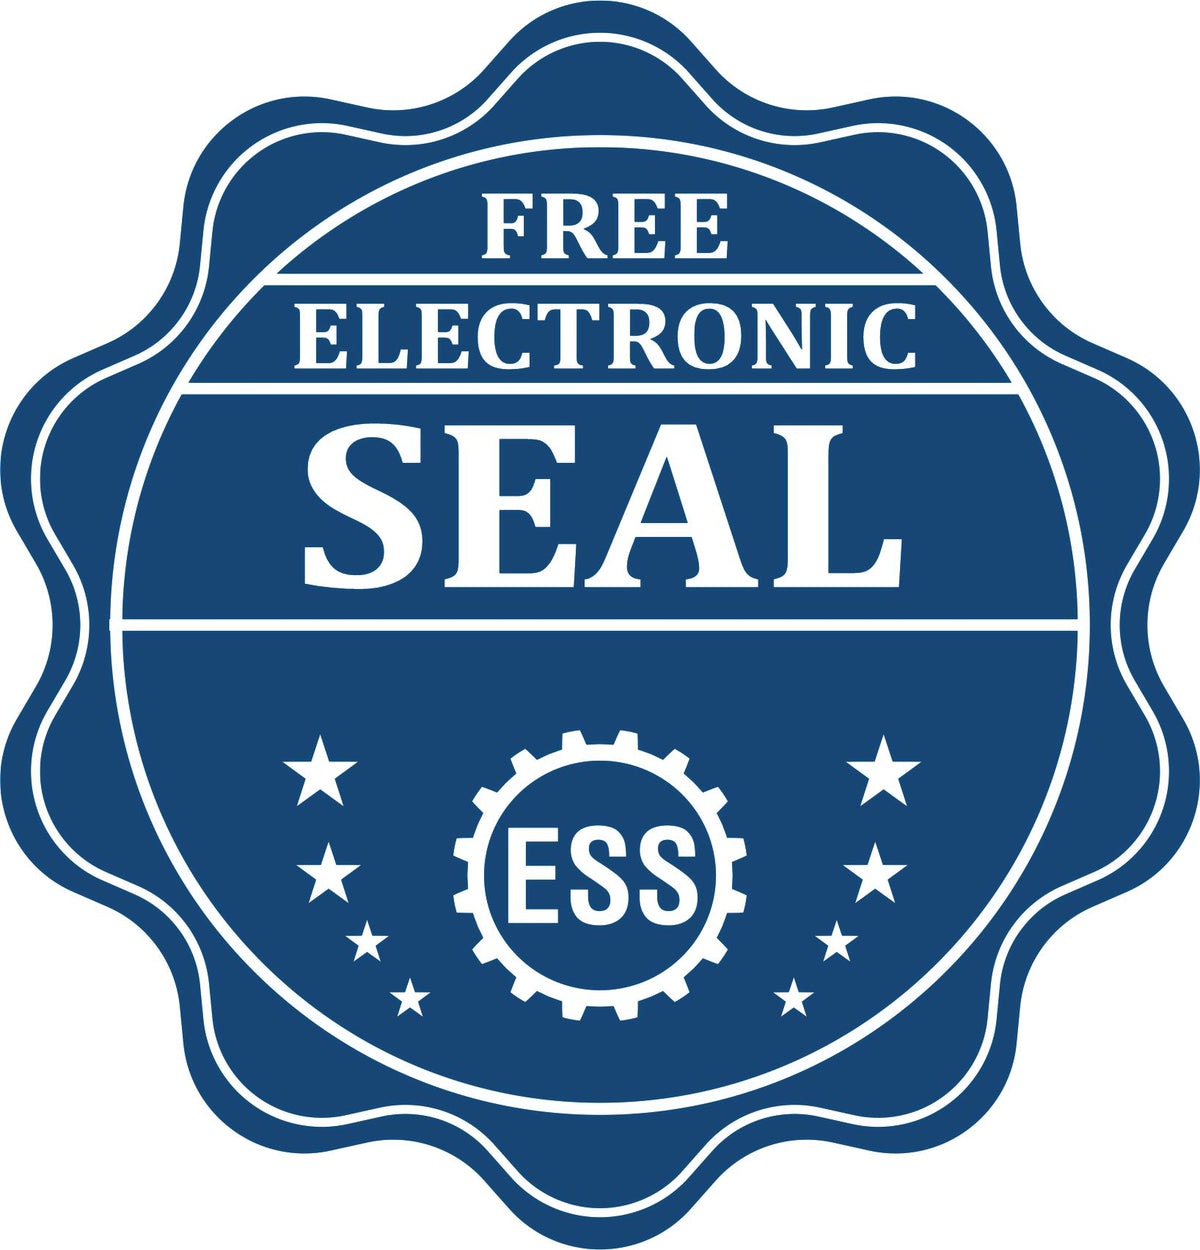 A badge showing a free electronic seal for the State of Connecticut Soft Land Surveyor Embossing Seal with stars and the ESS gear on the emblem.